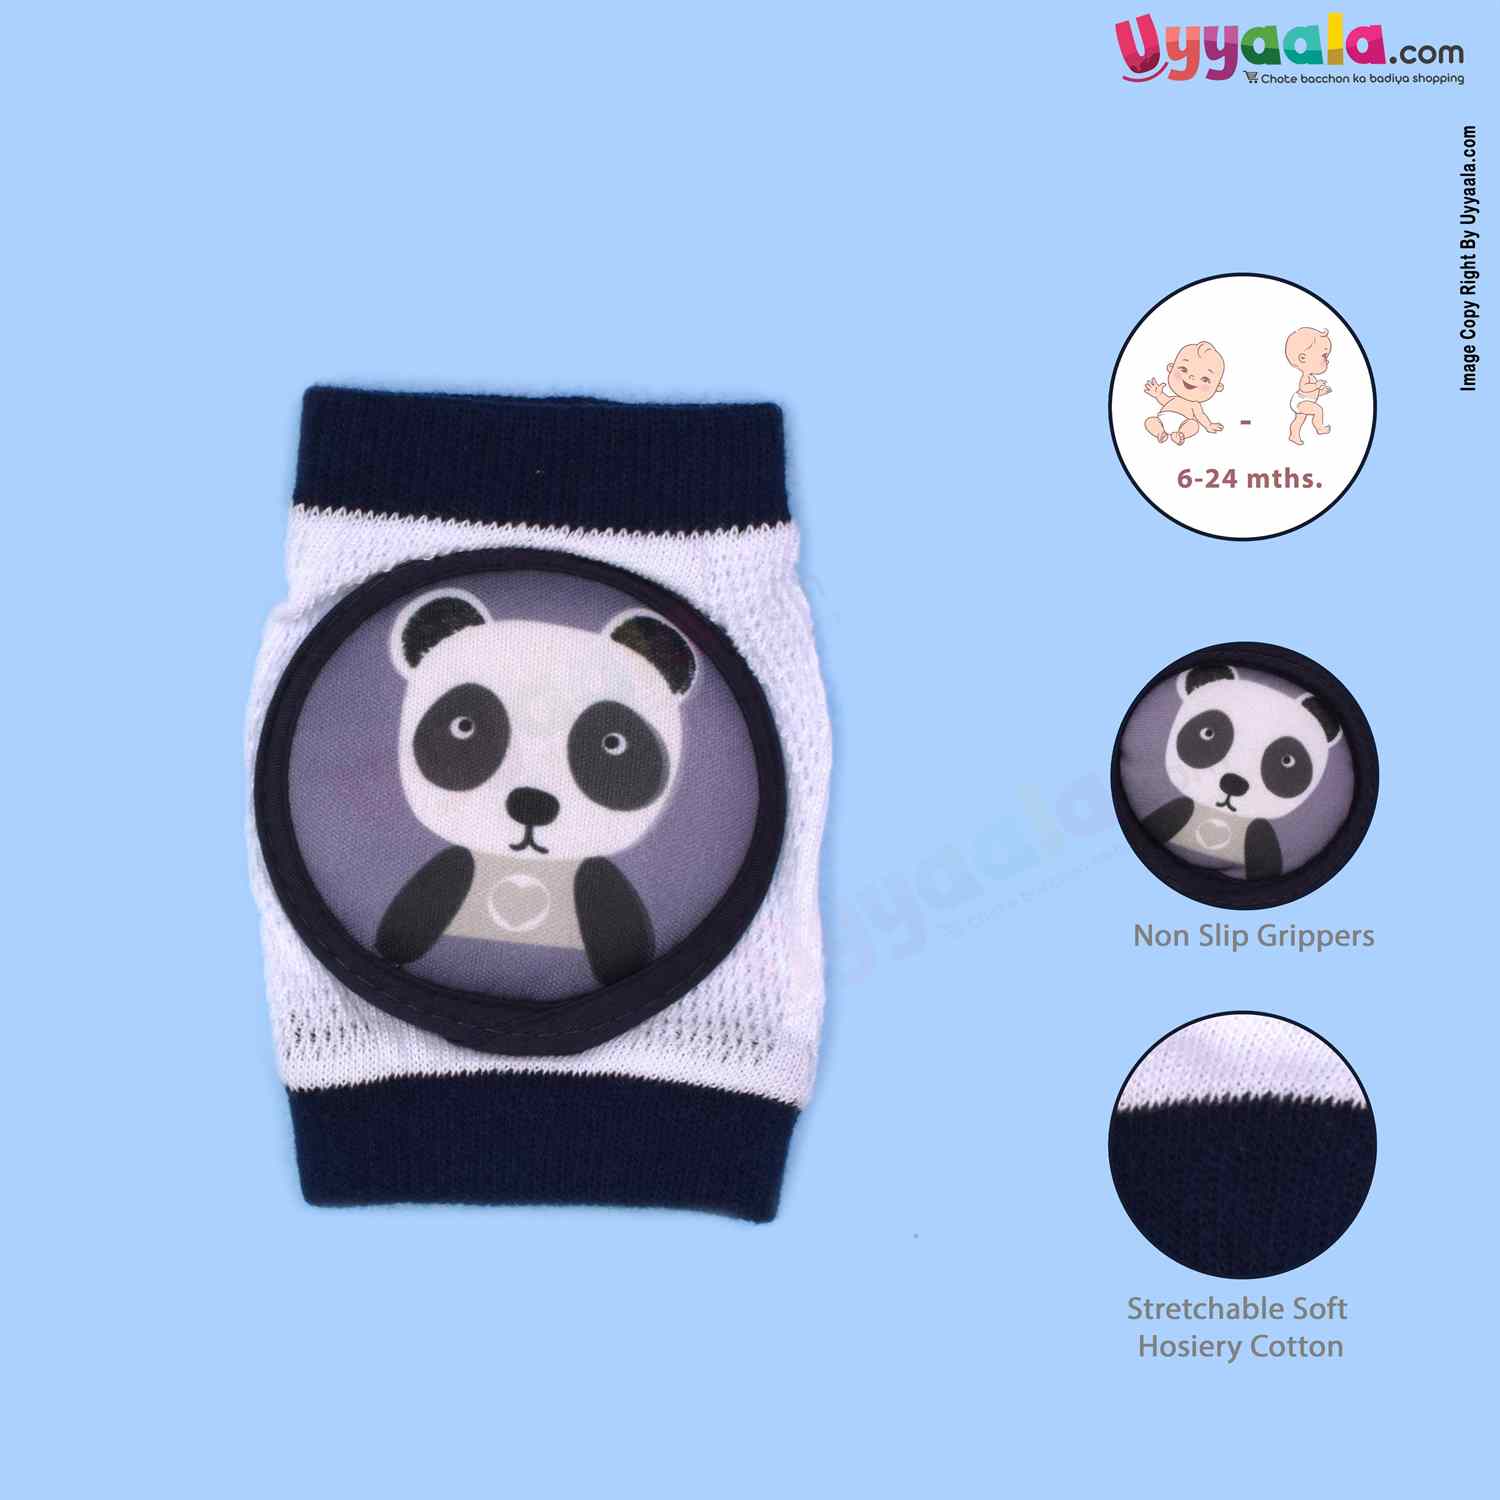 BARBIE BROWN Hosiery Cotton Stretchable Knee Protection Pads for Crawling Babies with Panda Patch Pack of 1 Pair , 6m-2y age, White & Navy Blue